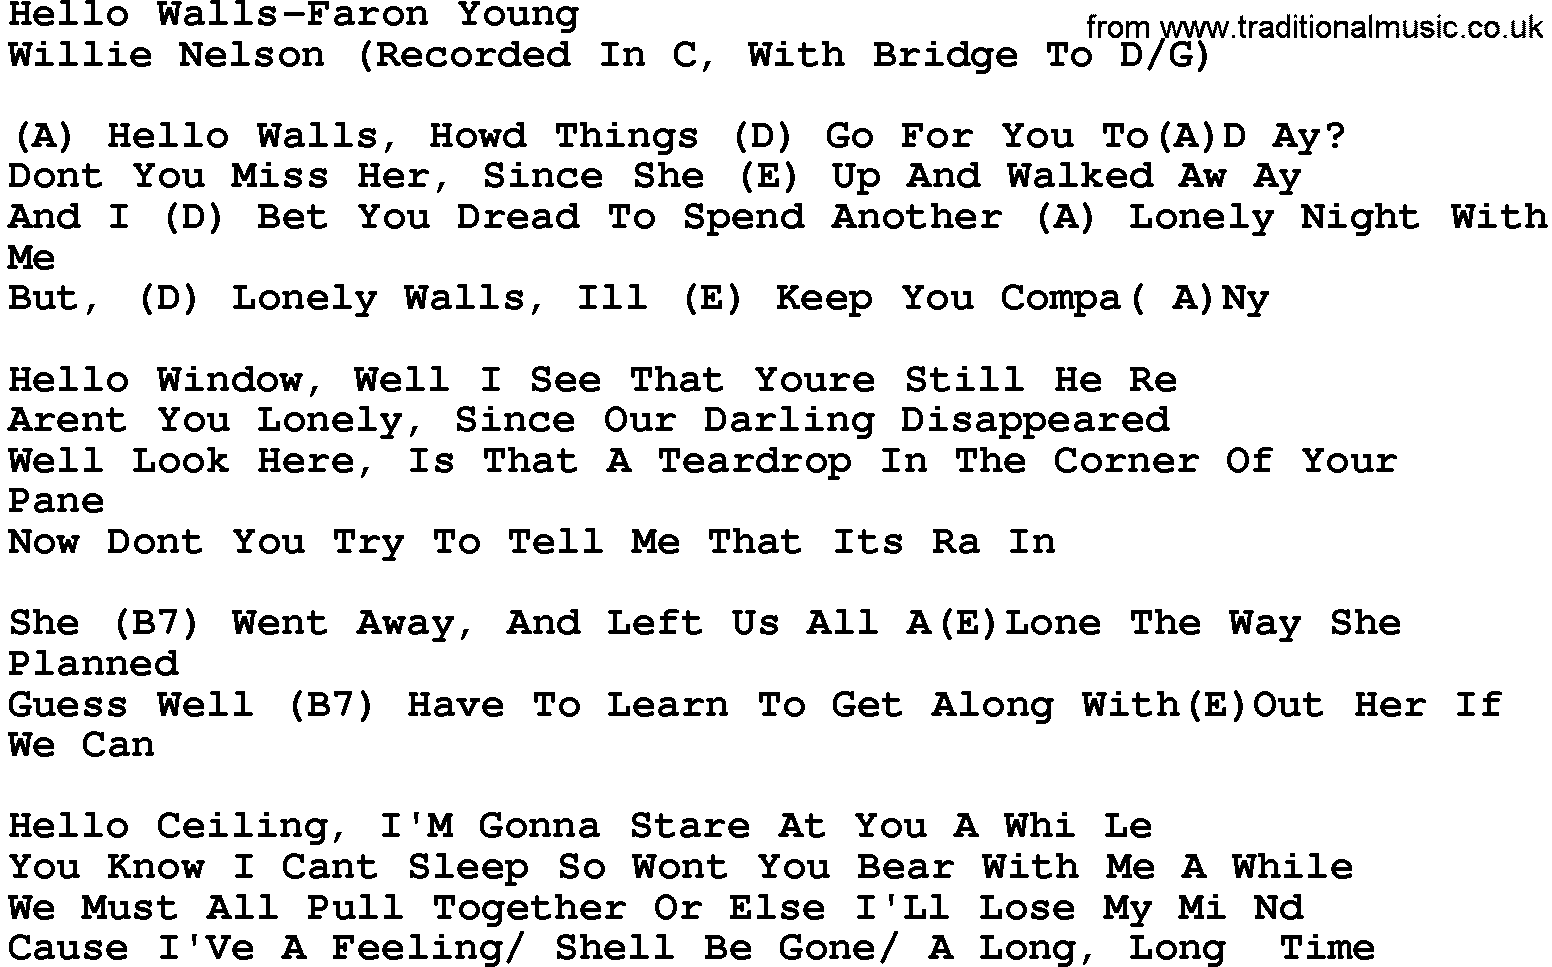 Country music song: Hello Walls-Faron Young, Willie Nelson lyrics and chords